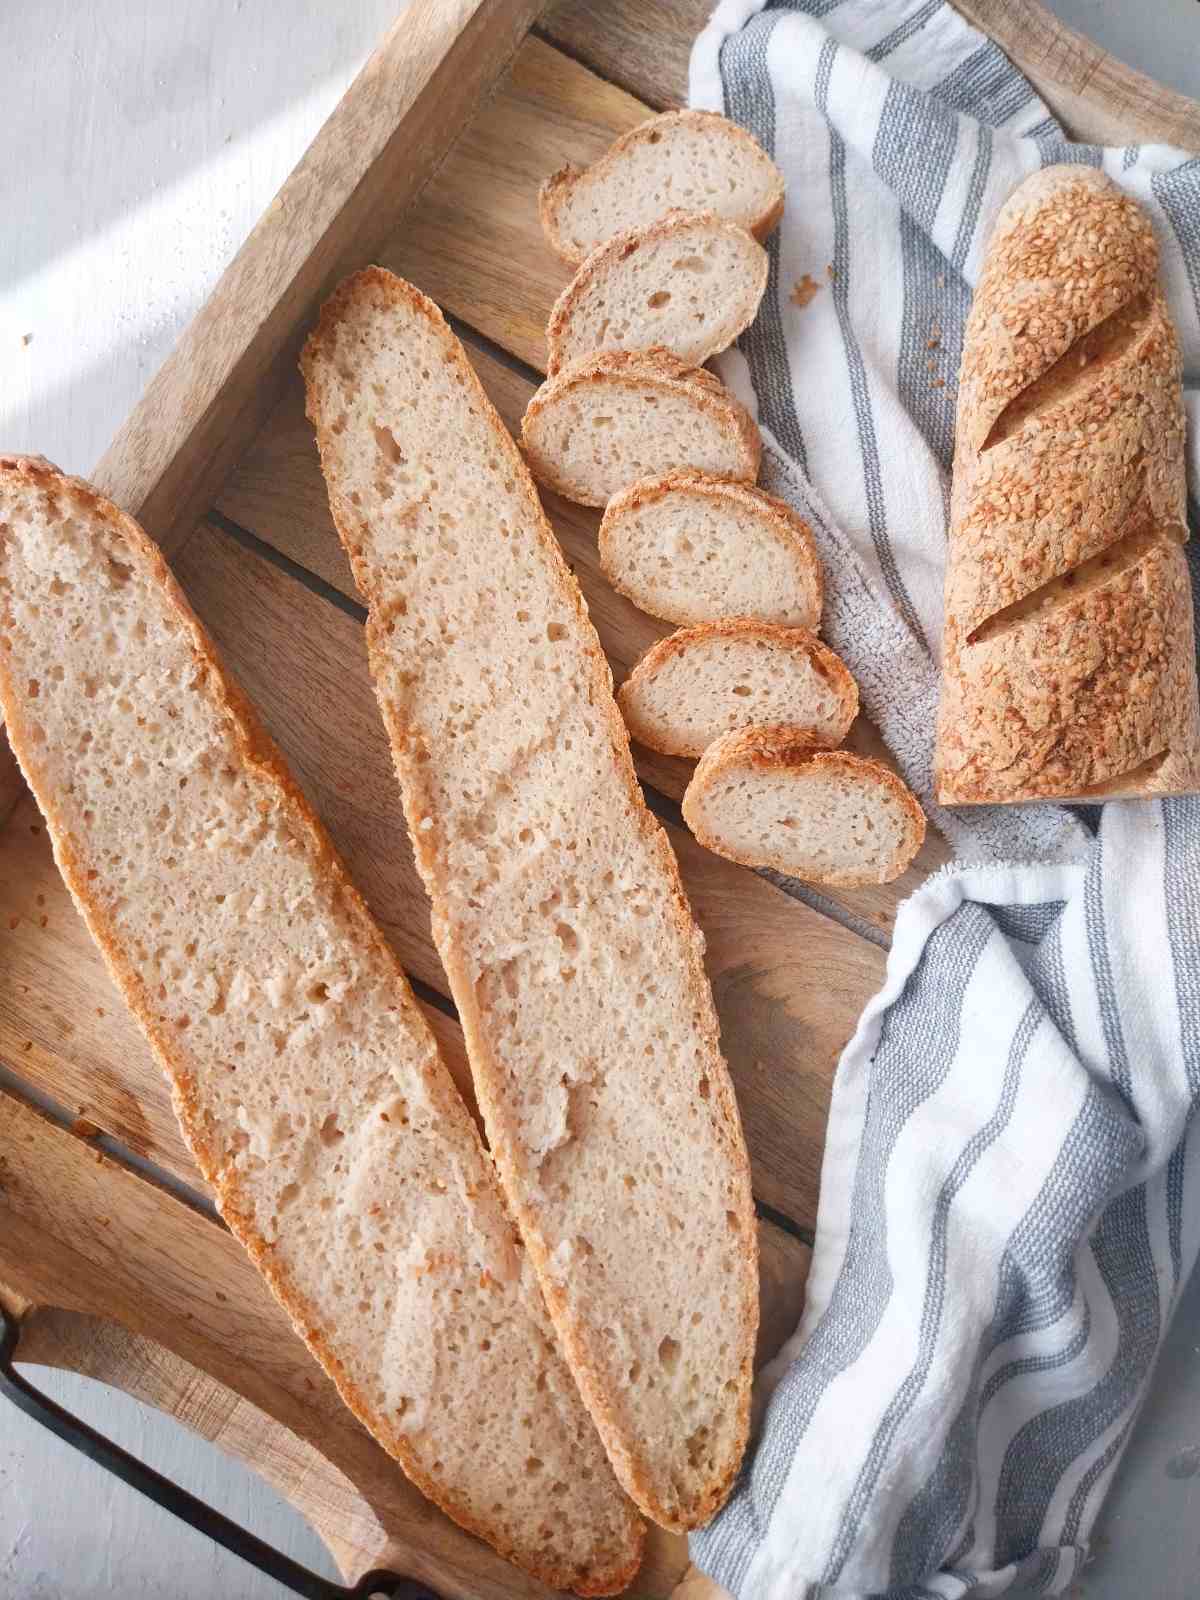 Gluten-free sourdough French bread on a wooden tray sliced.